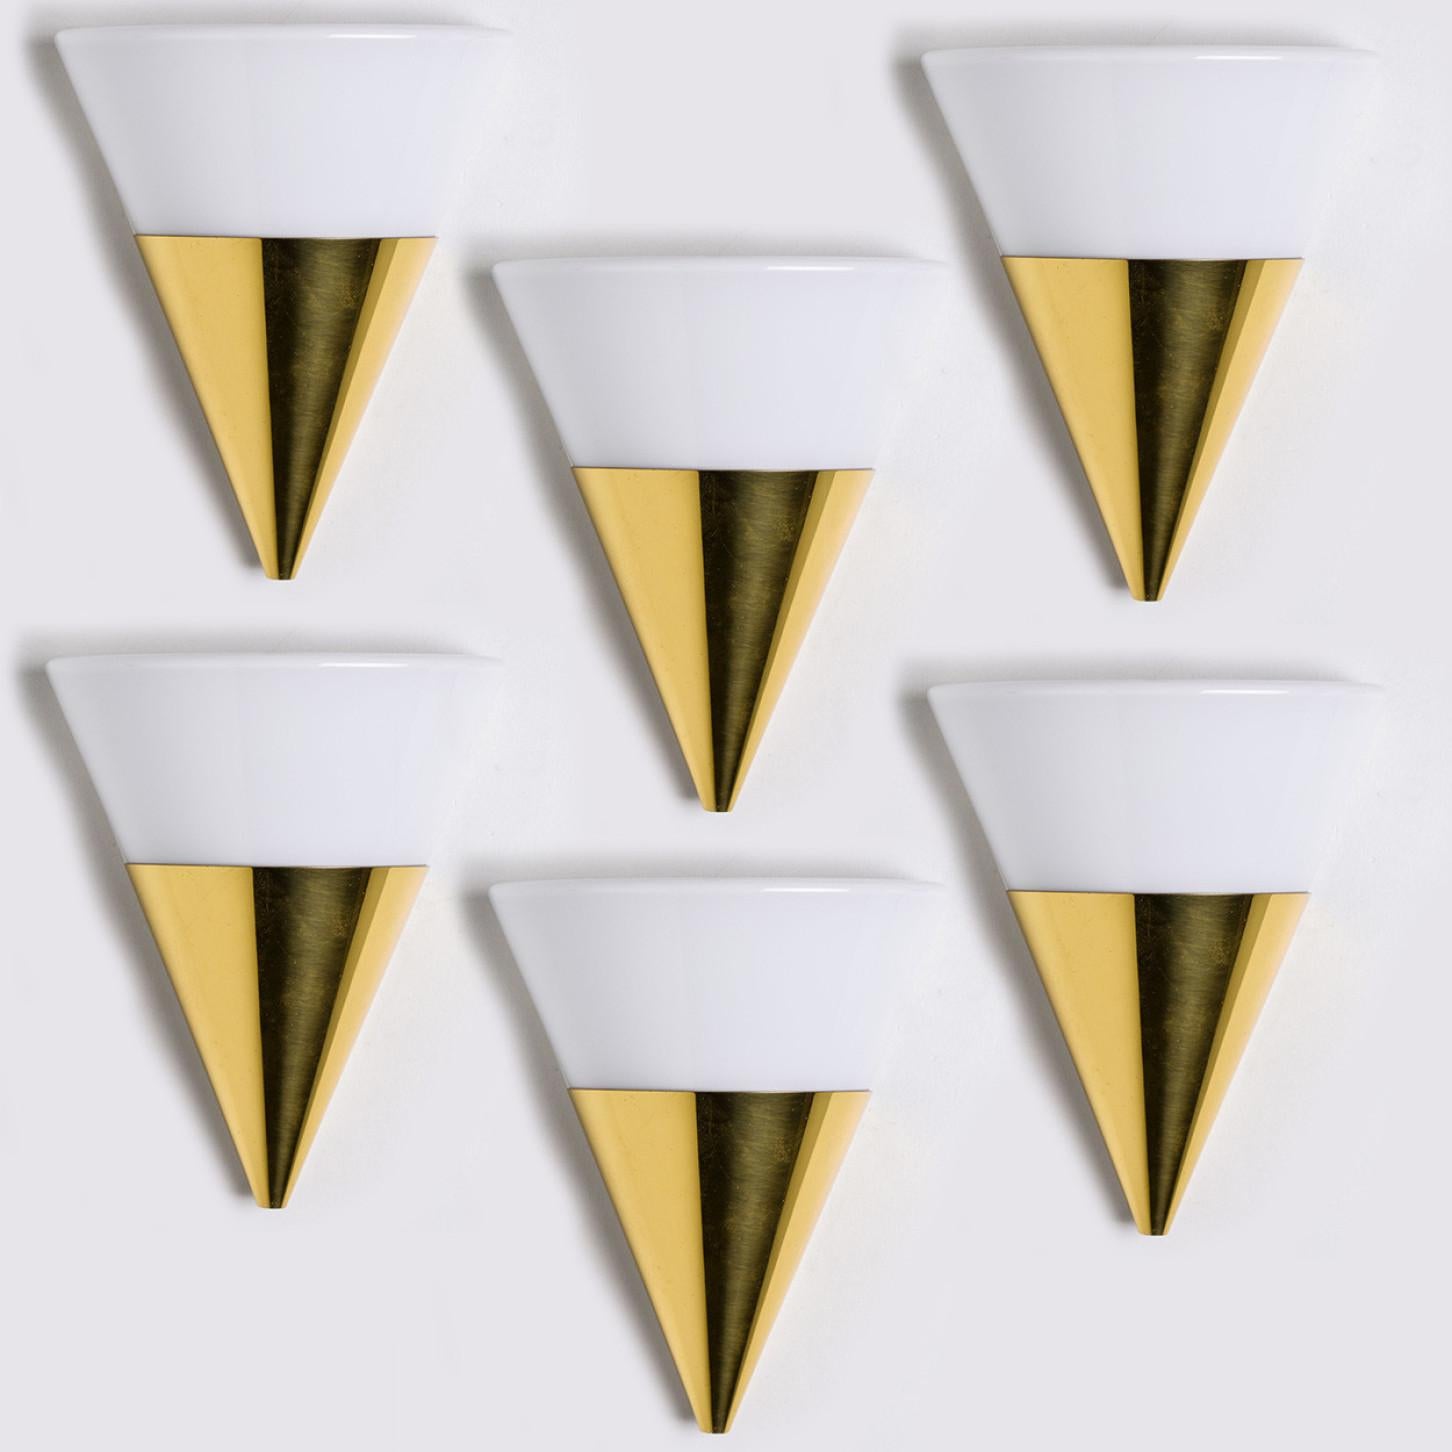 Cone shaped wall lights in white opaque glass with brass details. Manufactured by Glashütte Limburg in Germany during the 1970s. (early 1970s).

Nice craftsmanship. Minimal, geometric and simply shaped design.

Dimensions:
Height 9.84